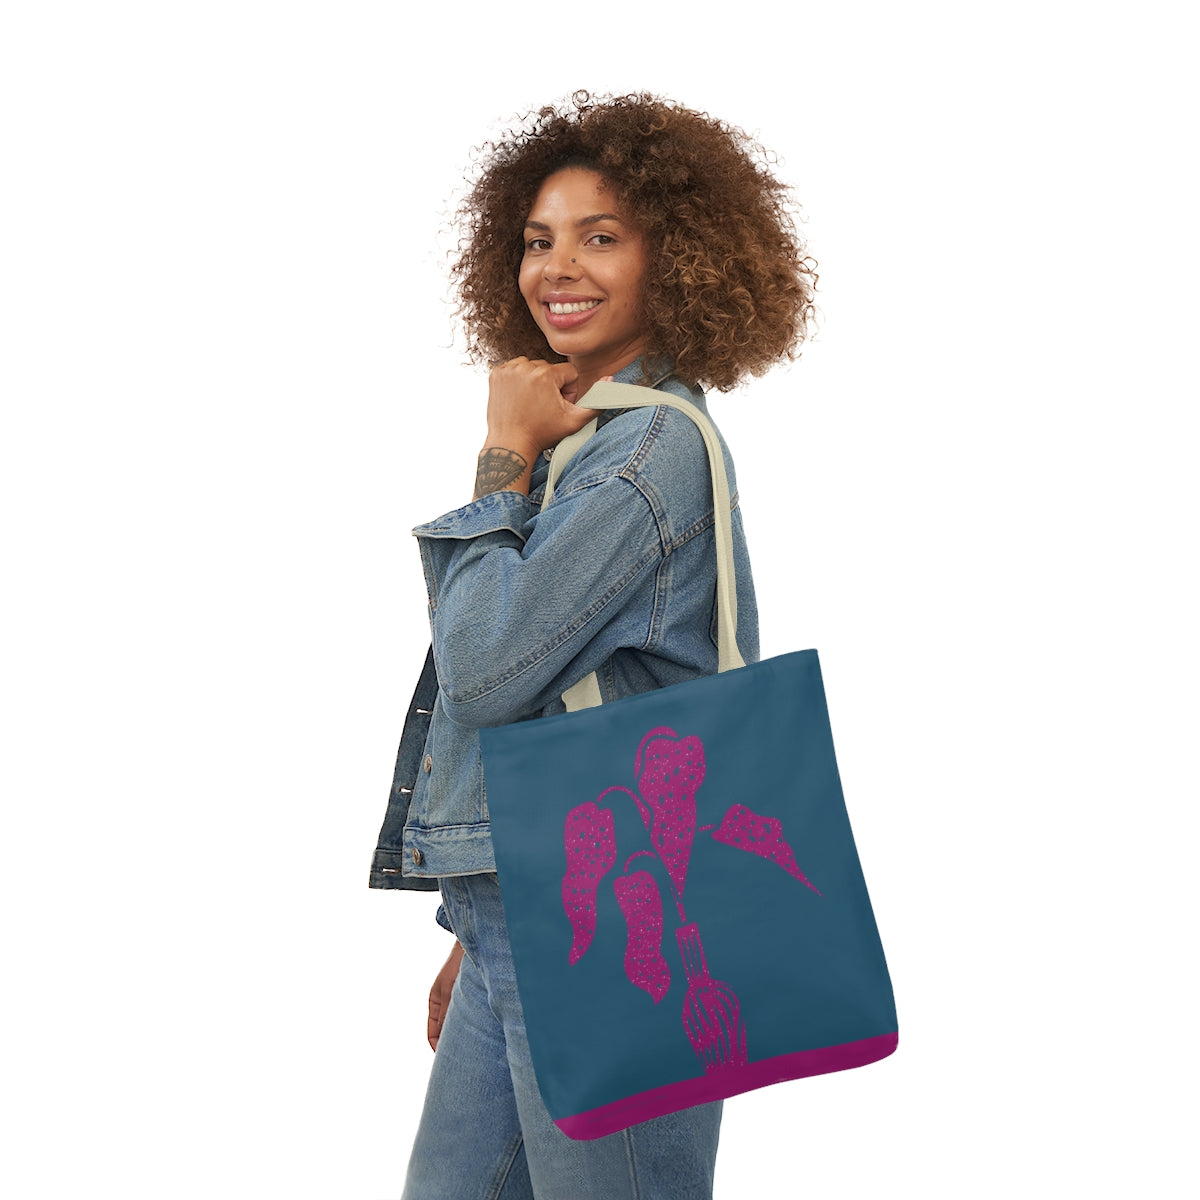 Magenta Potted Plant Polyester Canvas Tote Bag